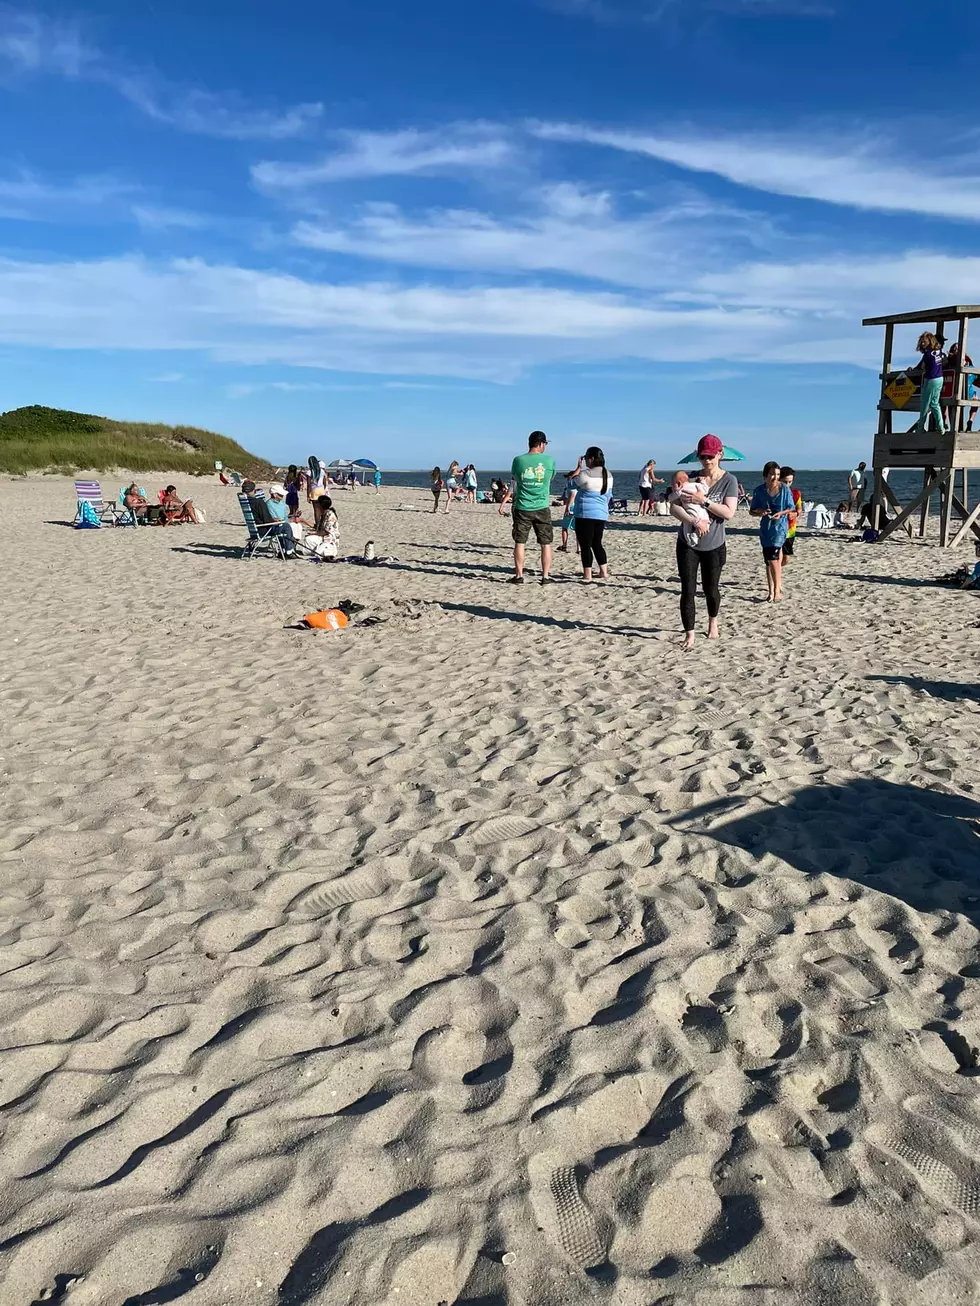 This Common Item Will Prohibited at a Popular MA Beach 2023